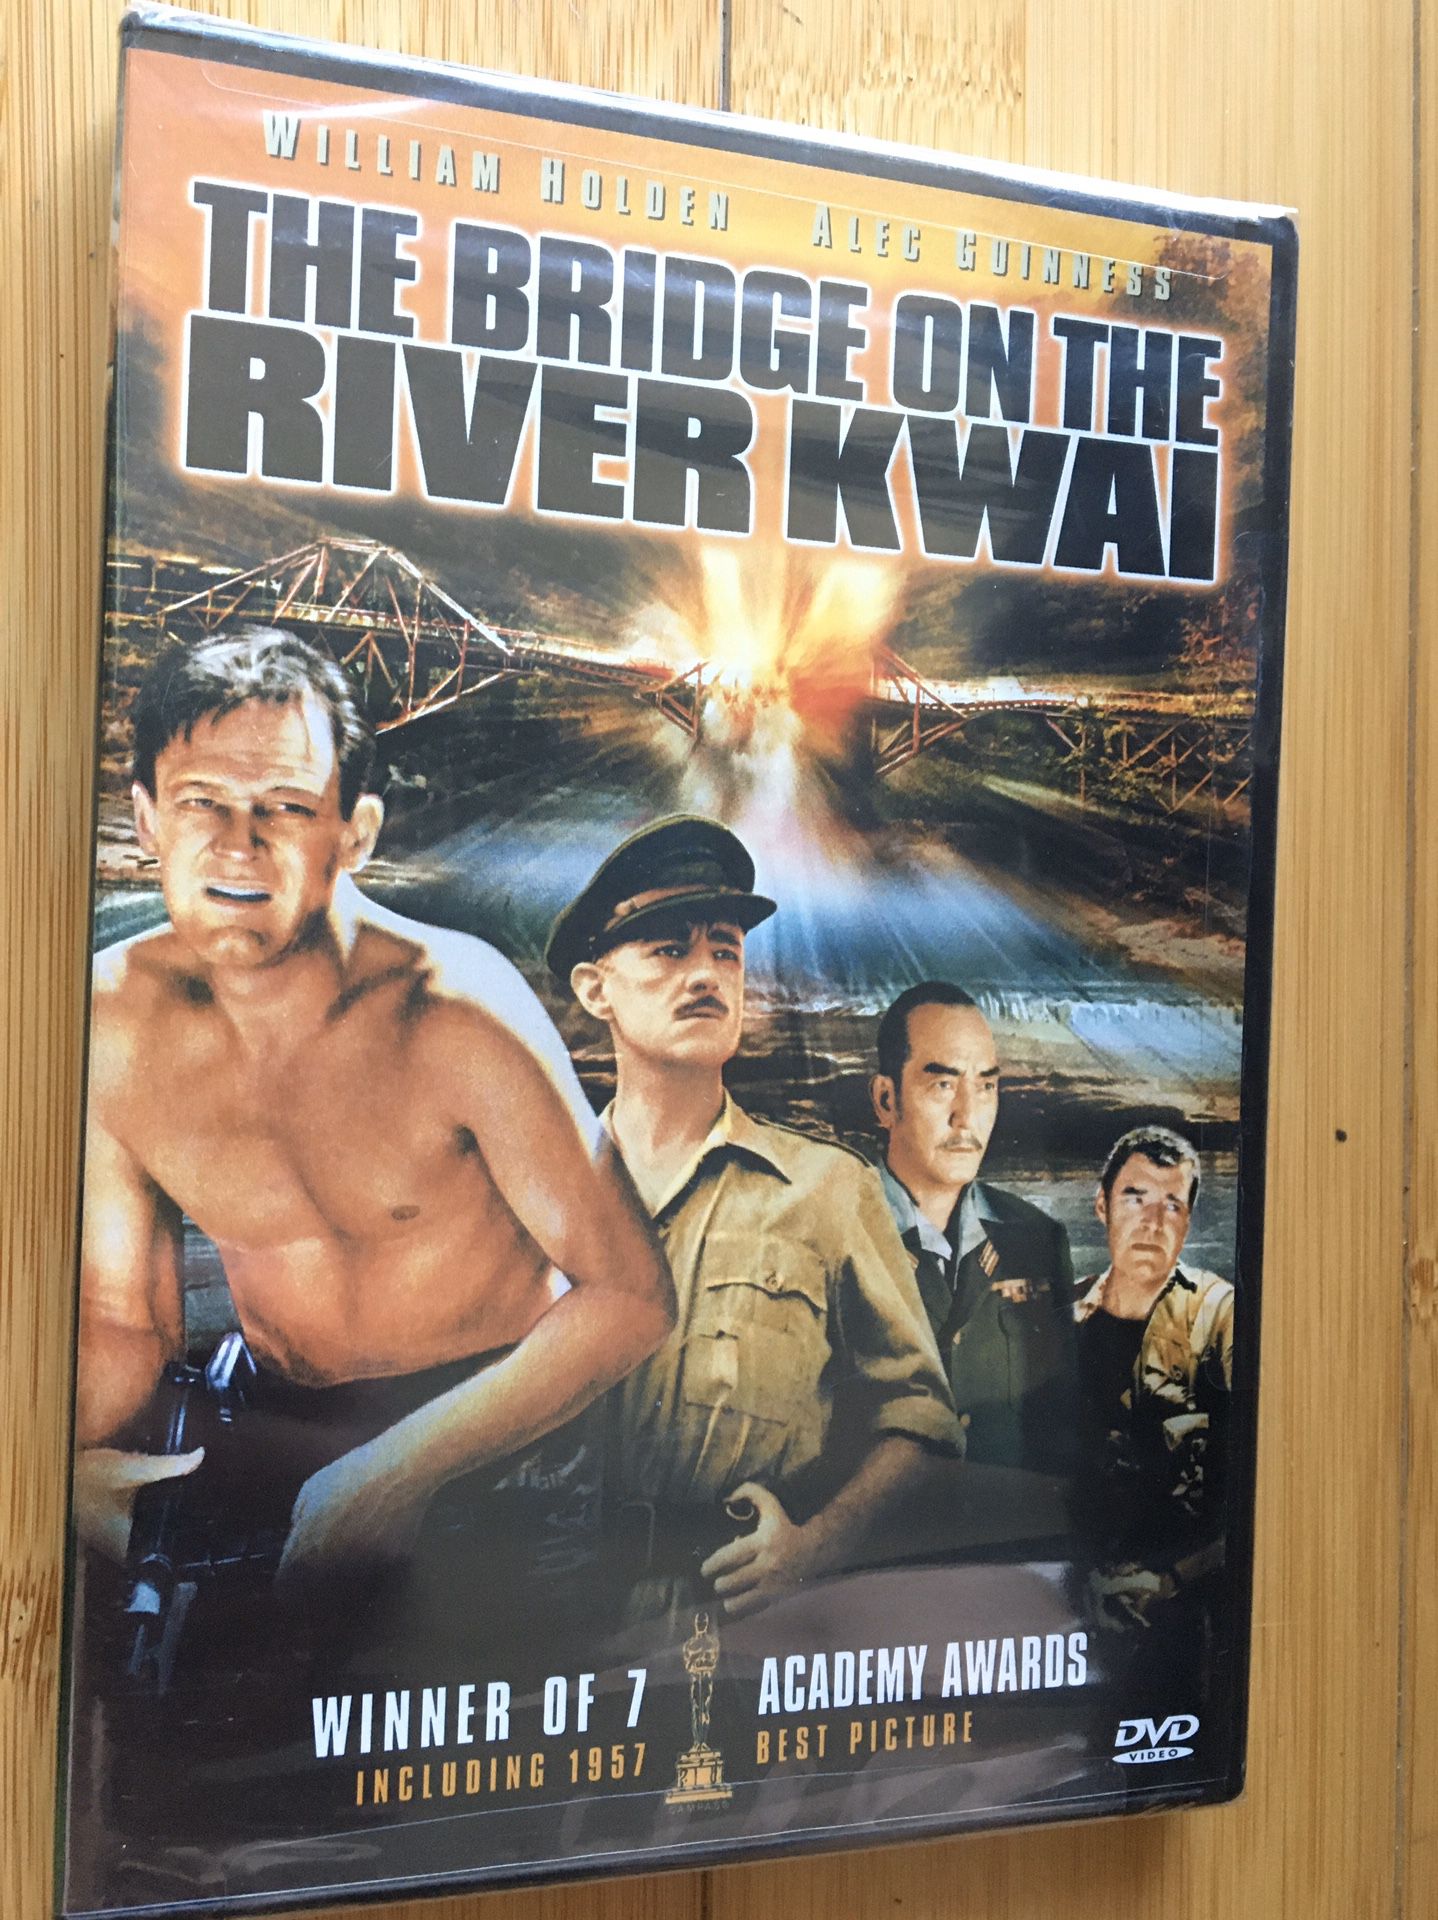 The Bridge On The River Kwai Brand New DVD (Sealed) in Manufacturers Shrink Wrap Best Picture Award For 1957 Academy Awards! $13.00